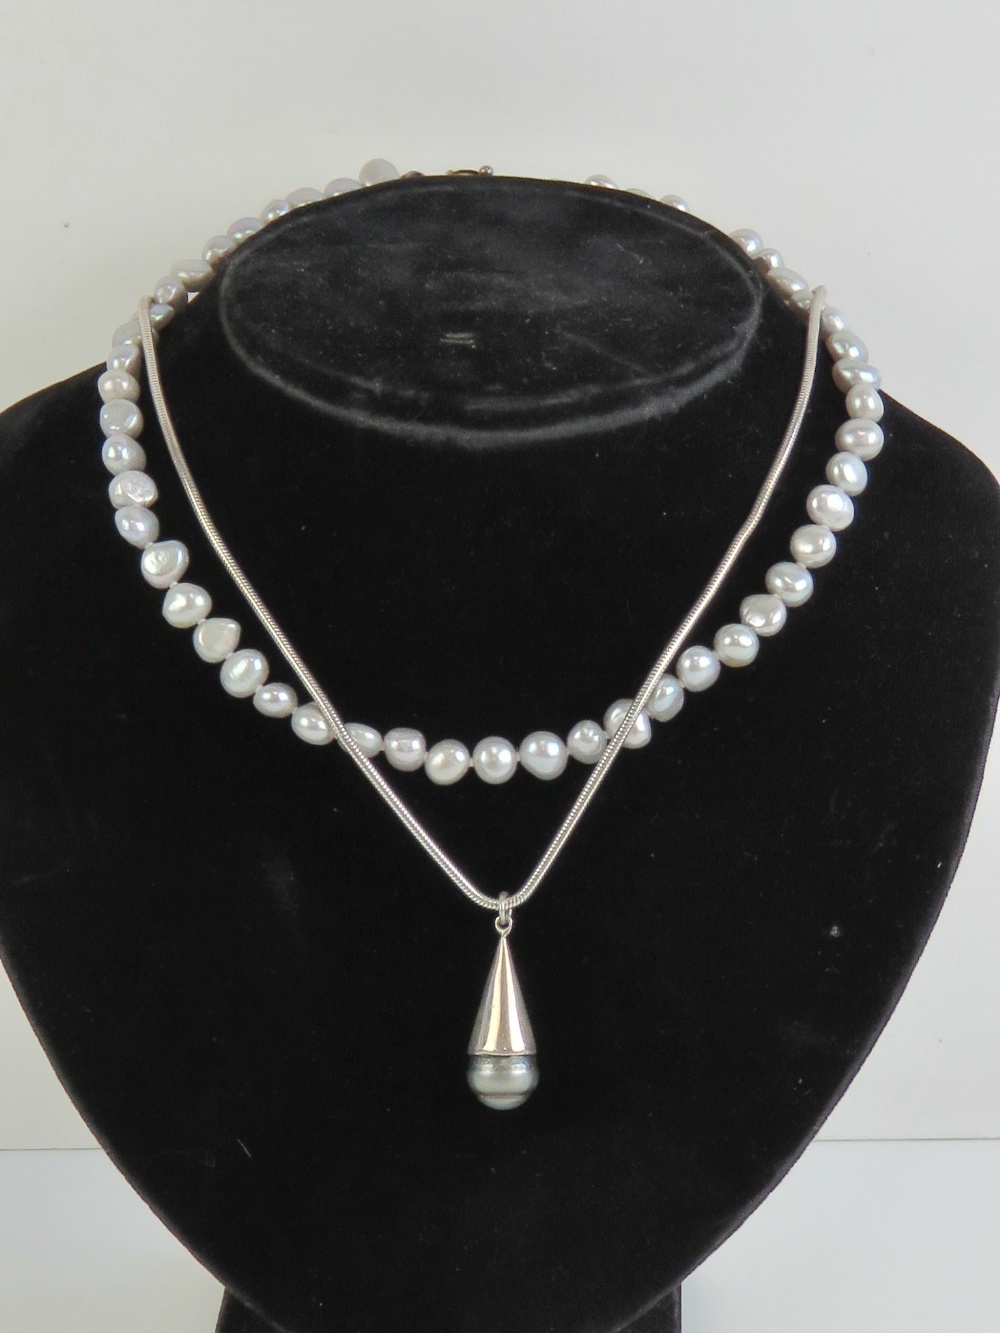 A grey pearl pendant on 925 silver chain together with a grey pearl necklace having 925 silver